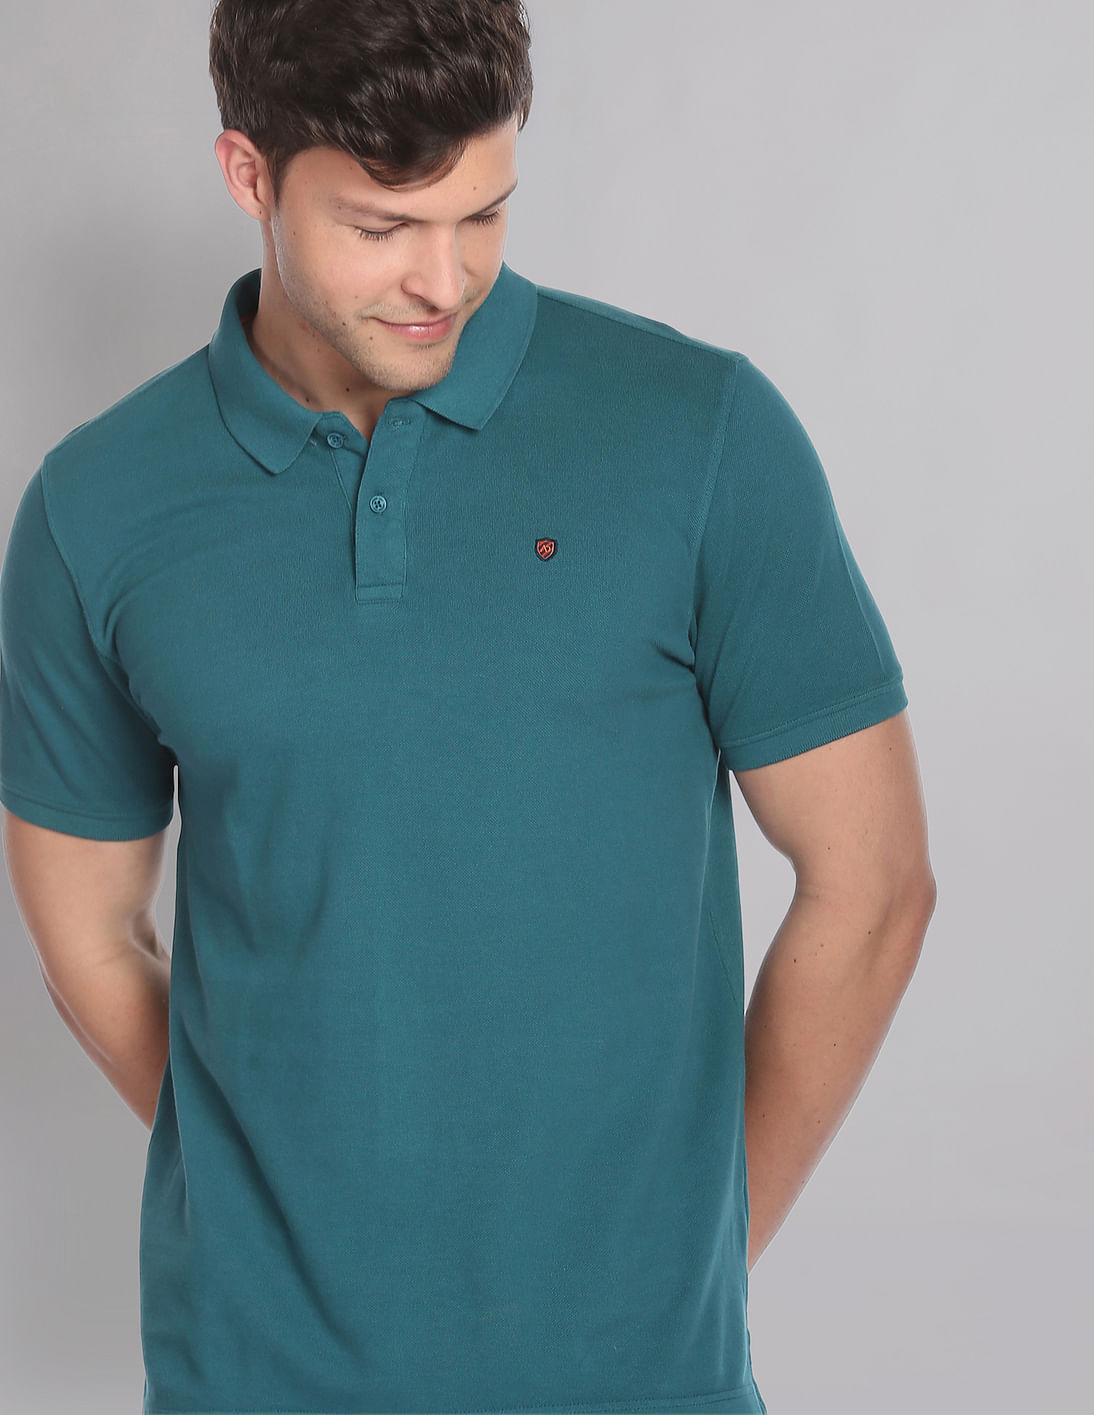 Buy AD by Arvind Cotton Solid Polo Shirt - NNNOW.com